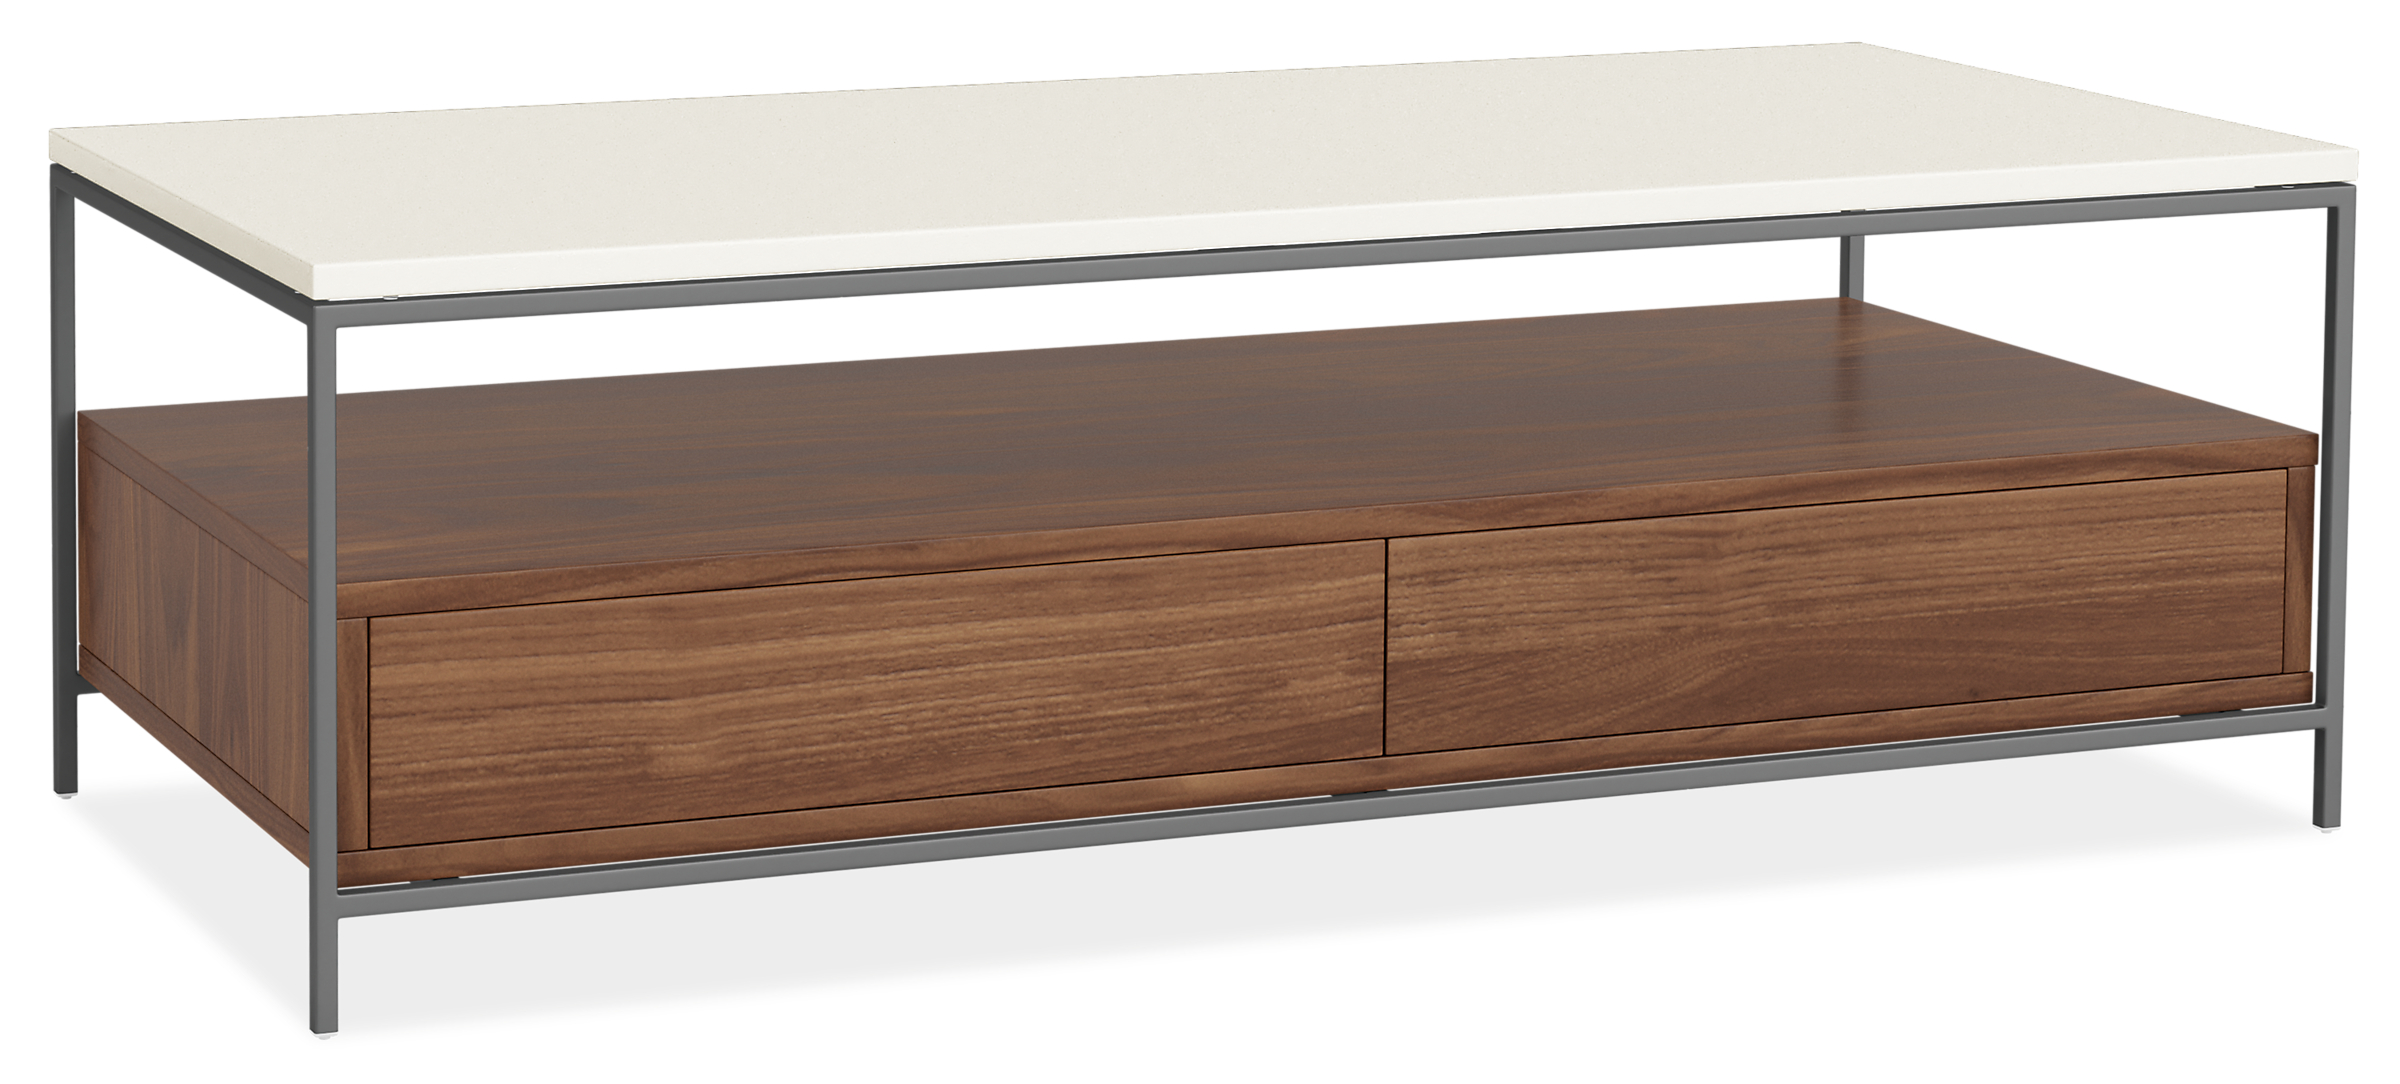 Williams 48w 24d 16h Coffee Table